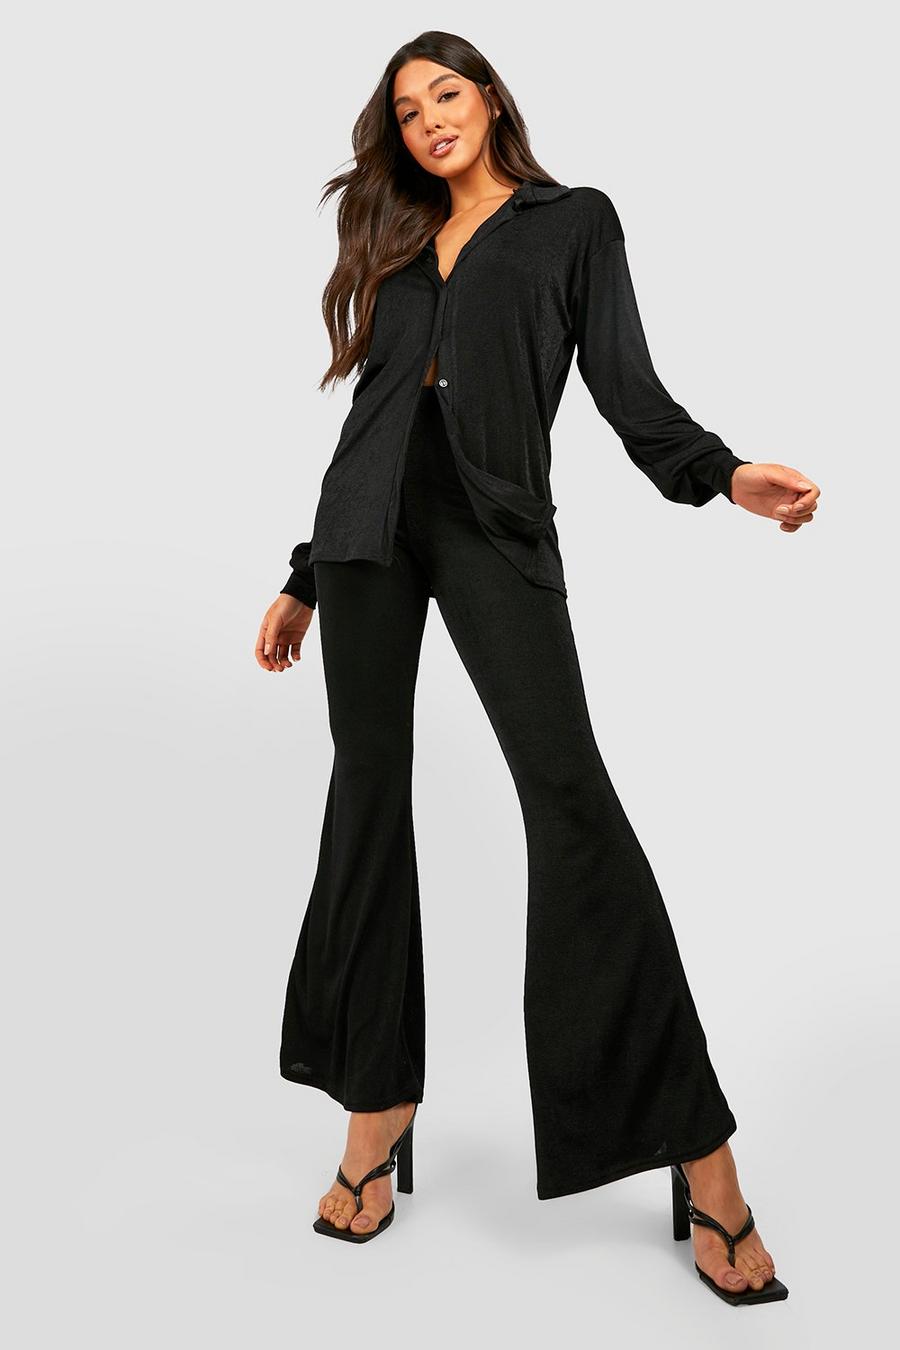 Black Acetate Slinky Relaxed Fit Shirt & Flare